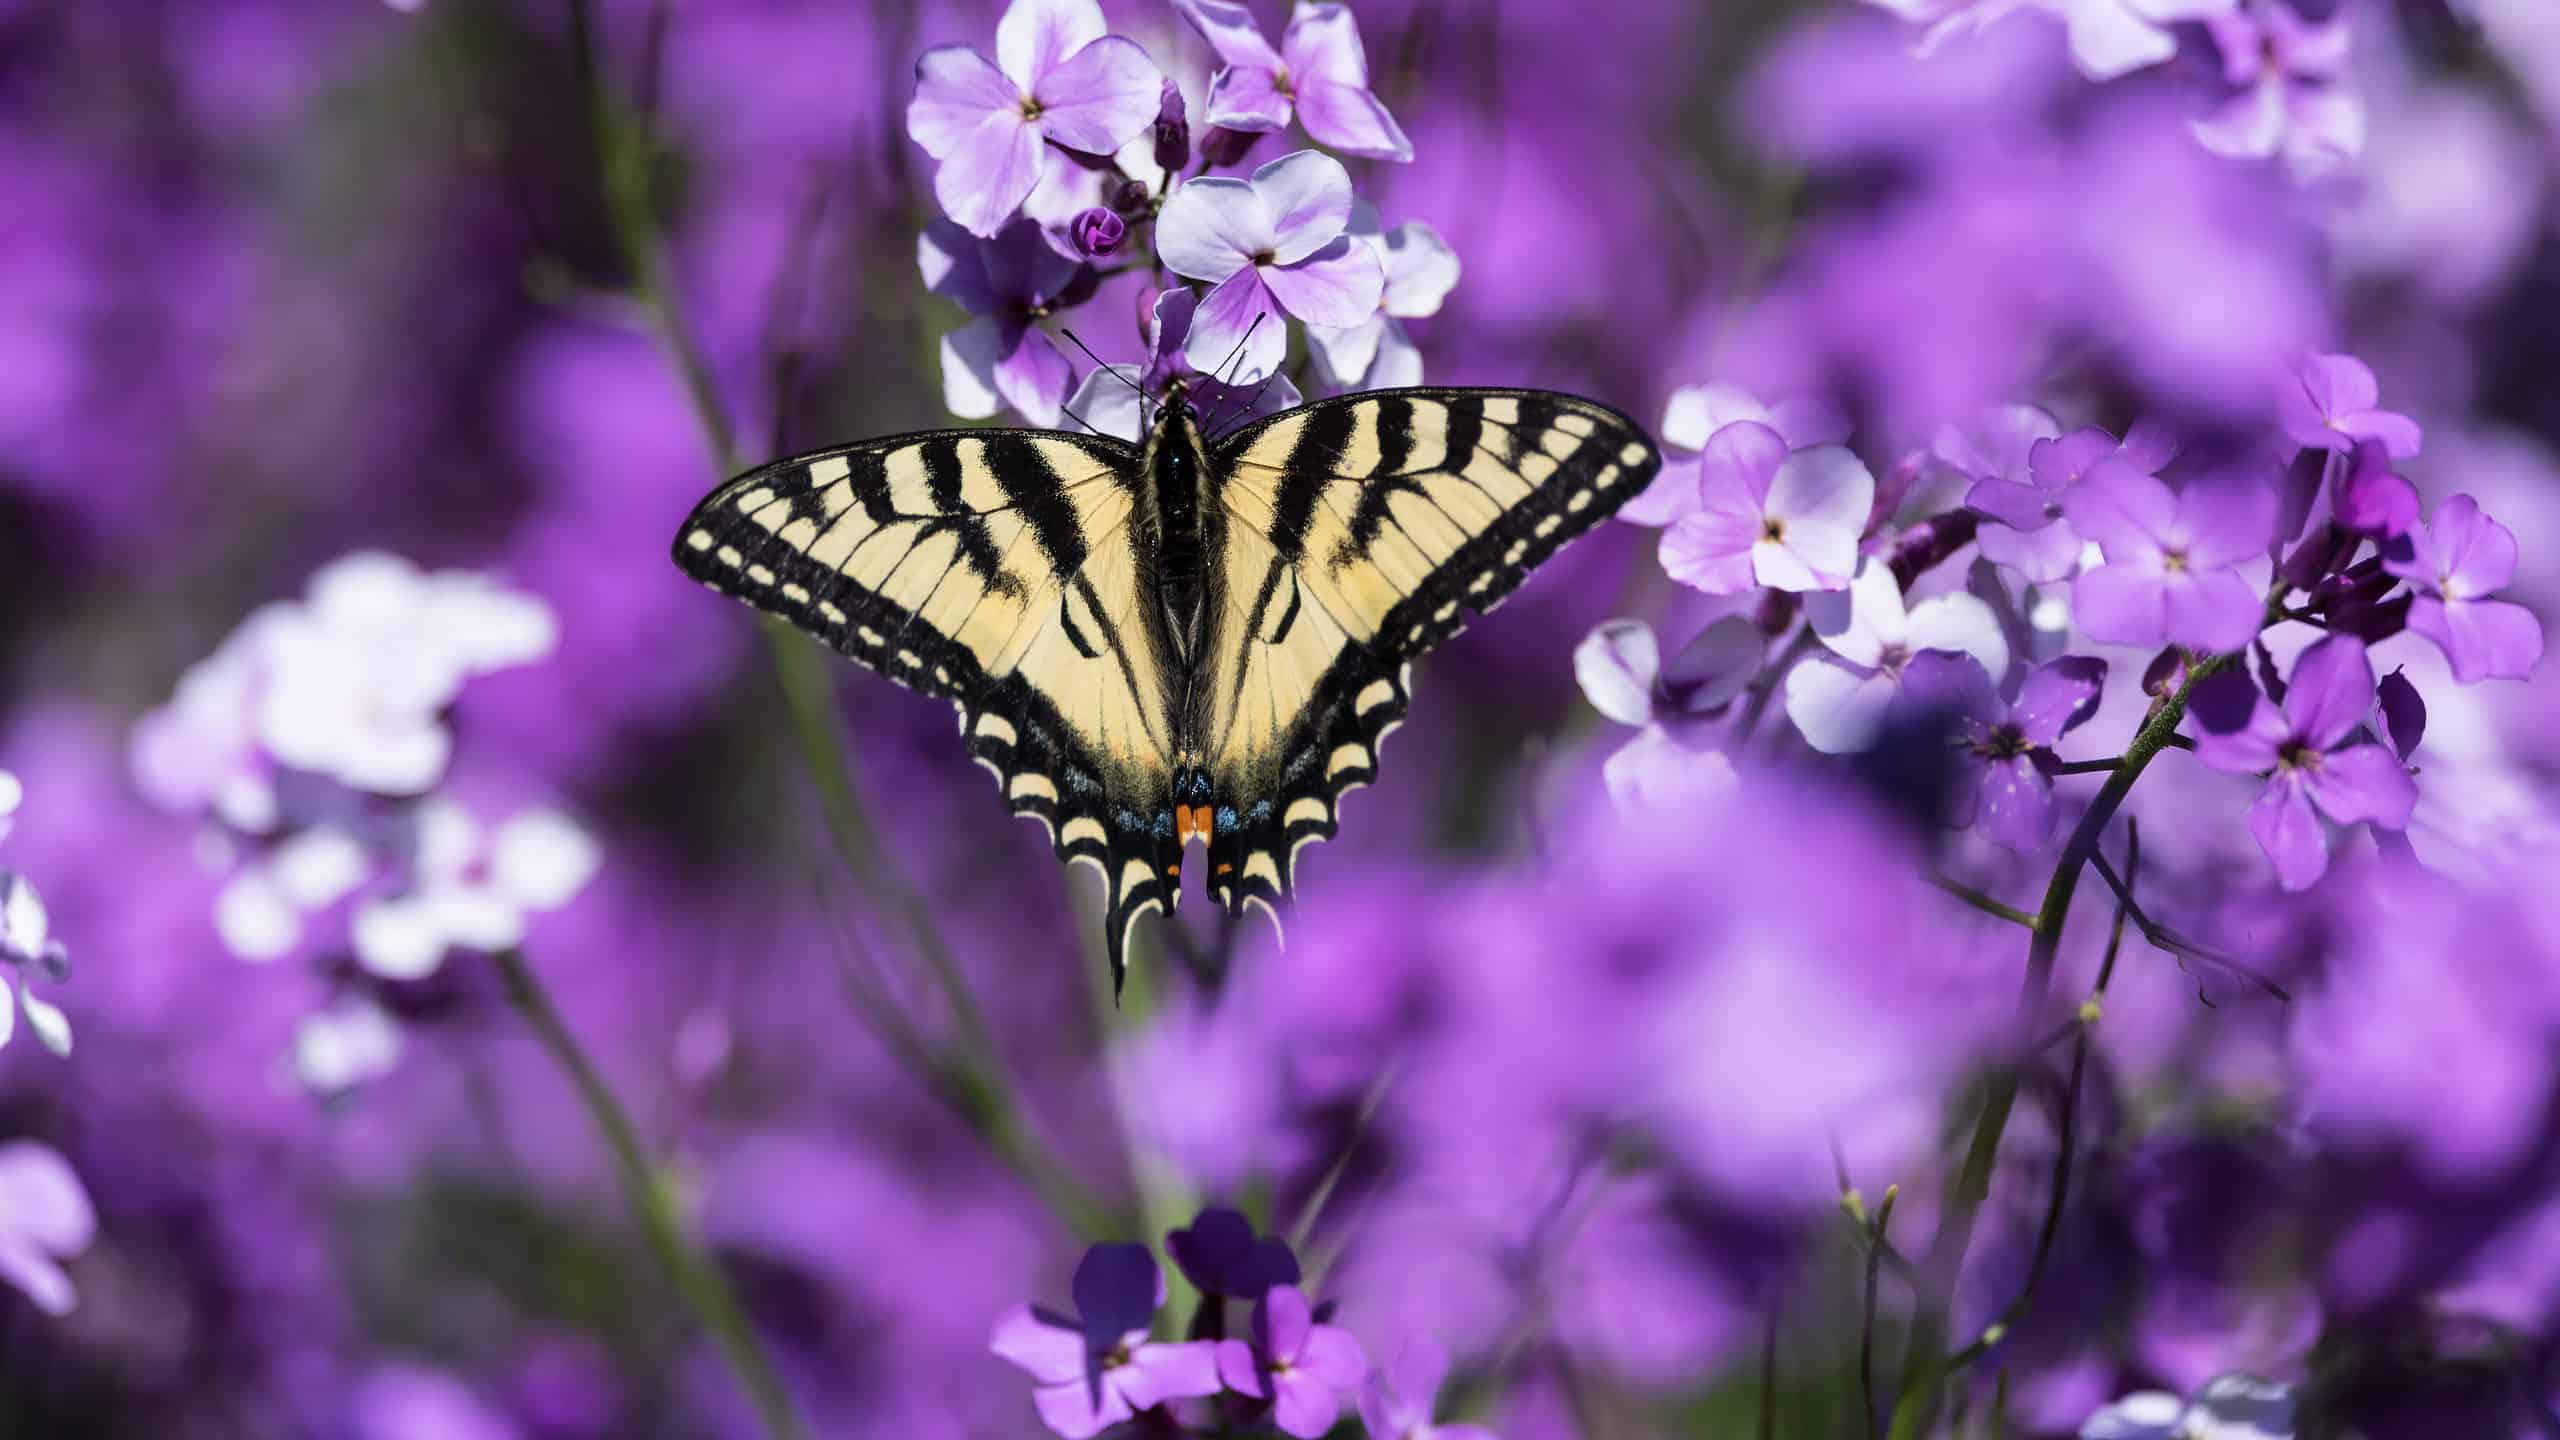 An Easter tiger swallowtail butterfly against a background of purple flowers